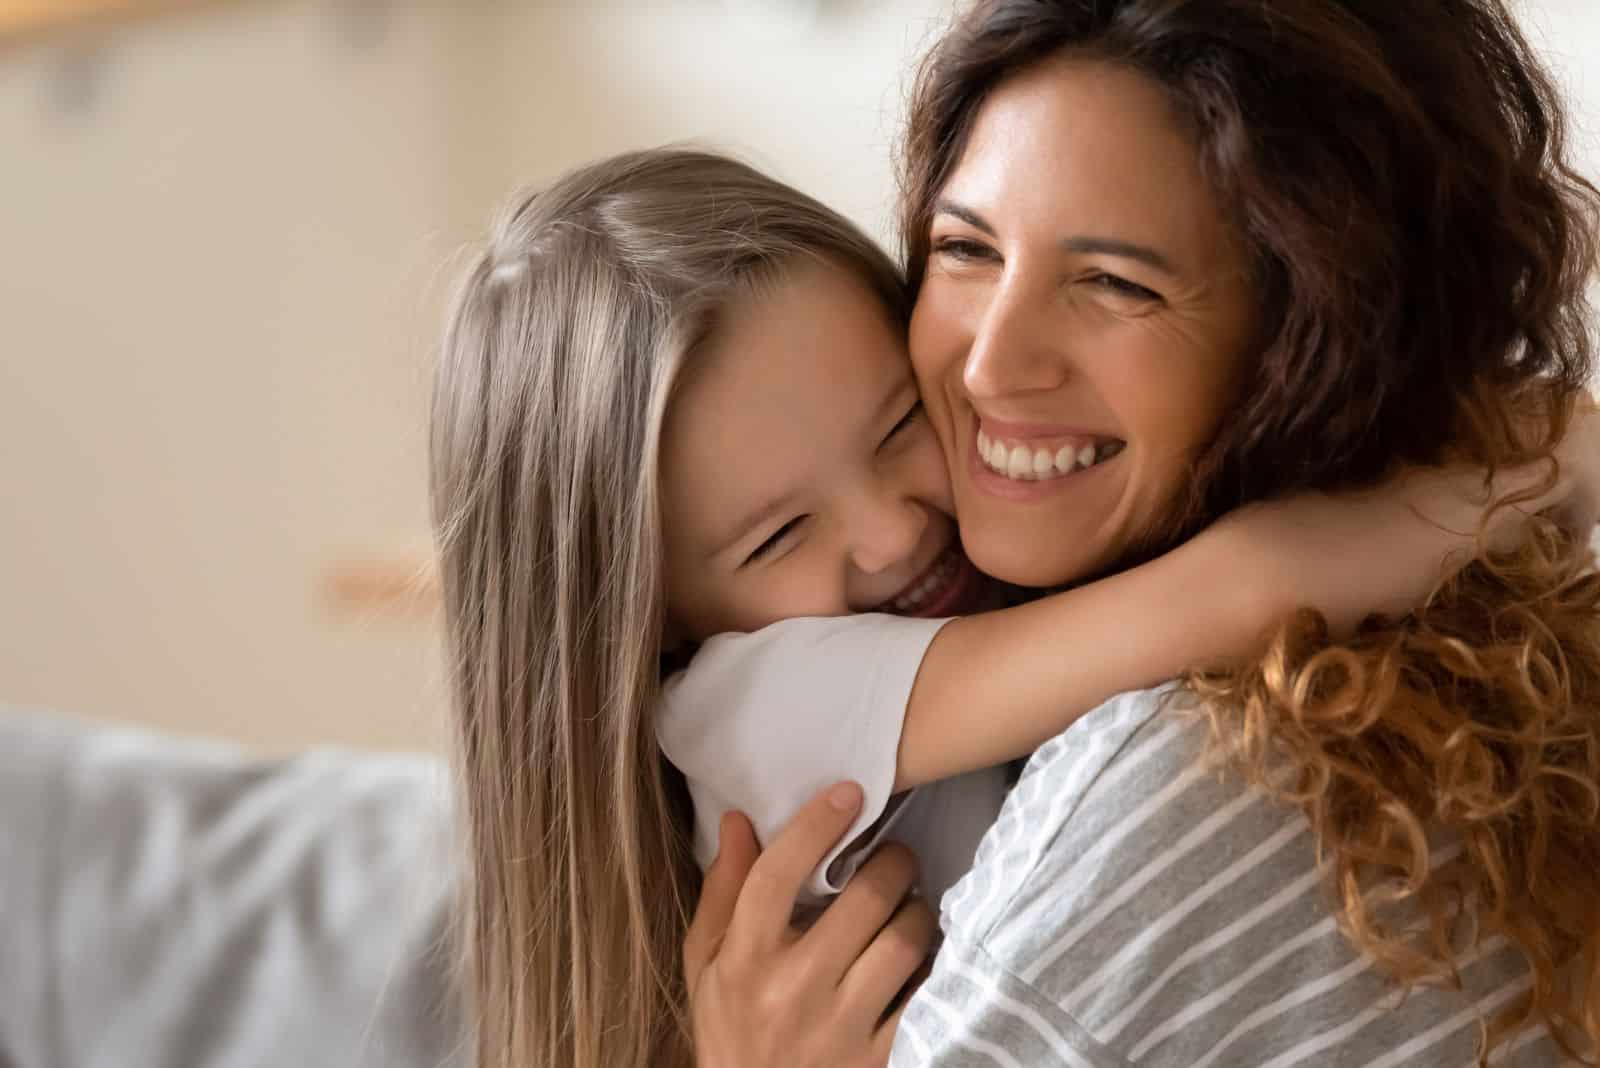 smiling woman in an embrace with a child